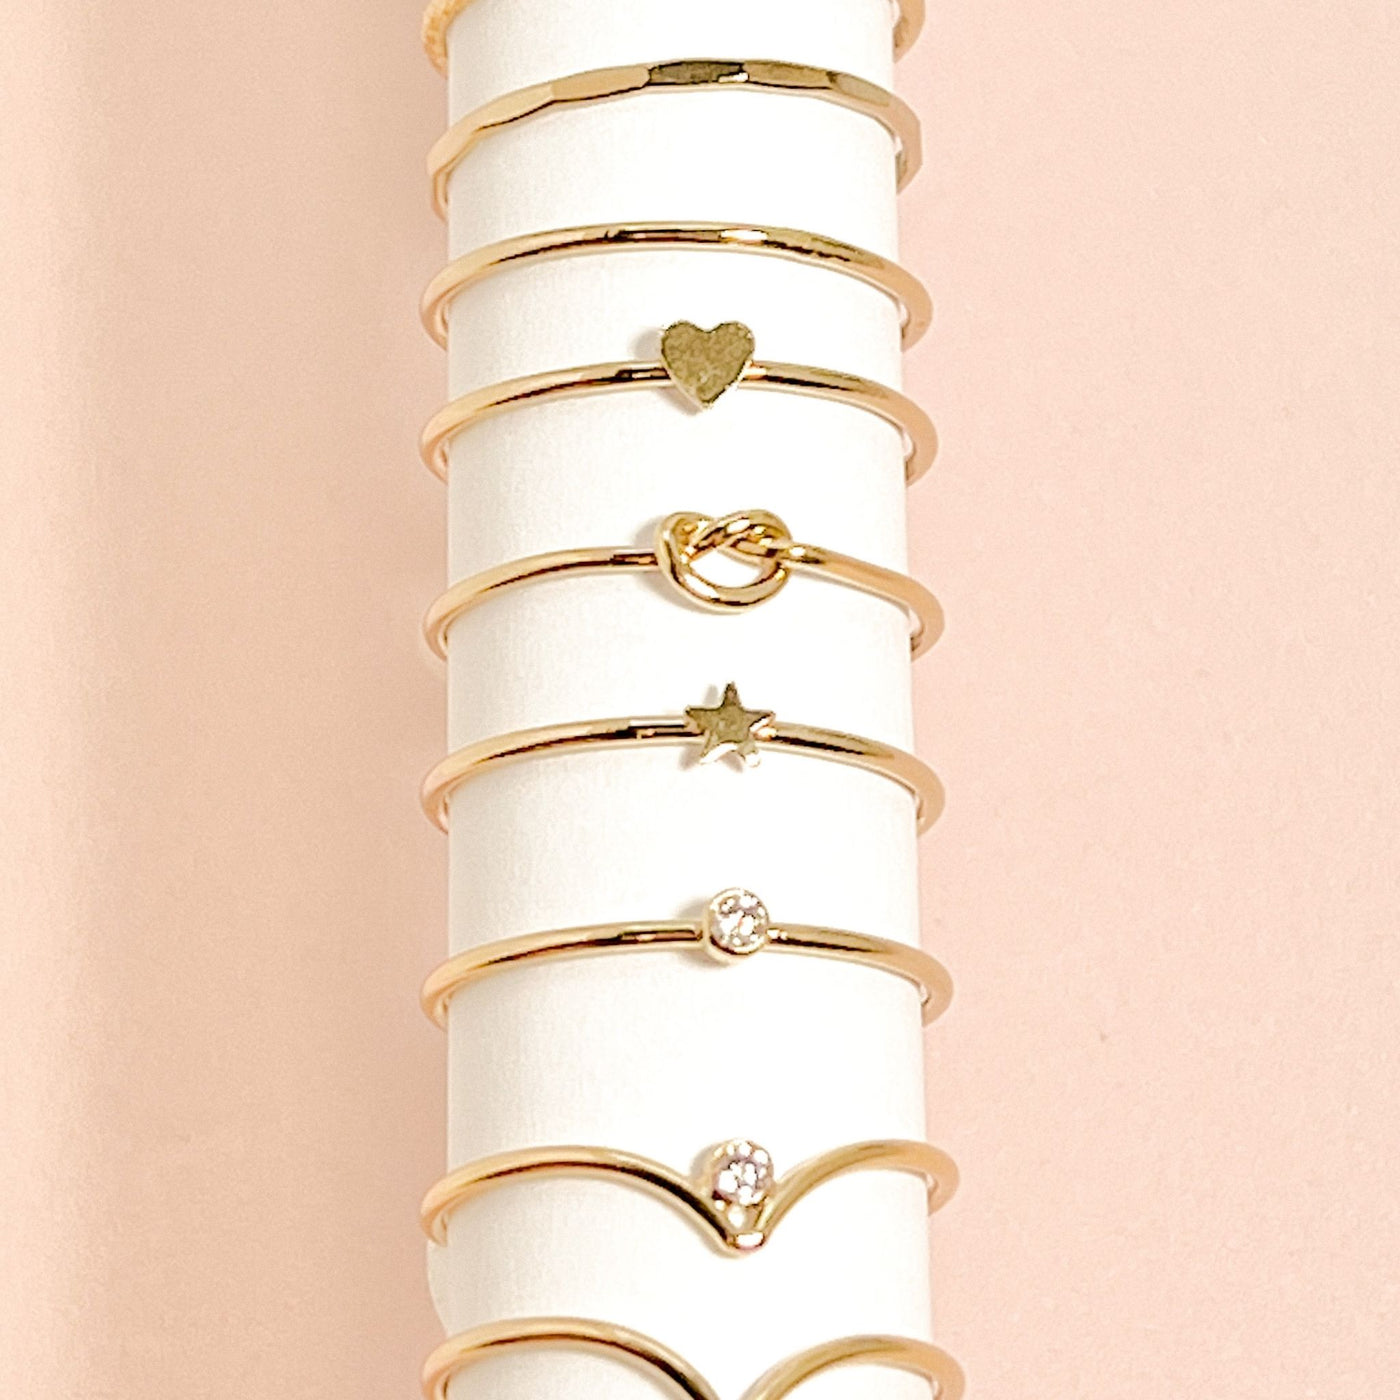 Assortment of differing styles of minimalist and dainty women’s stacking rings displayed on white roll of paper 